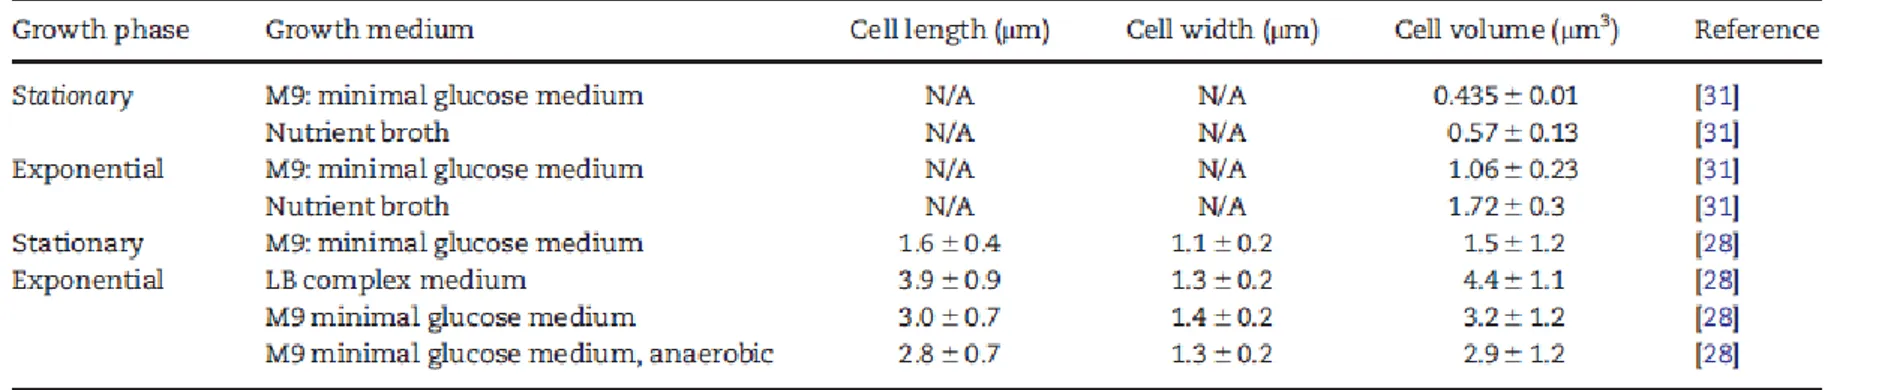 Table 2.  Volume of an  E. coli  cell in different stages of growth and media. Volumes from [31] were determined for  E